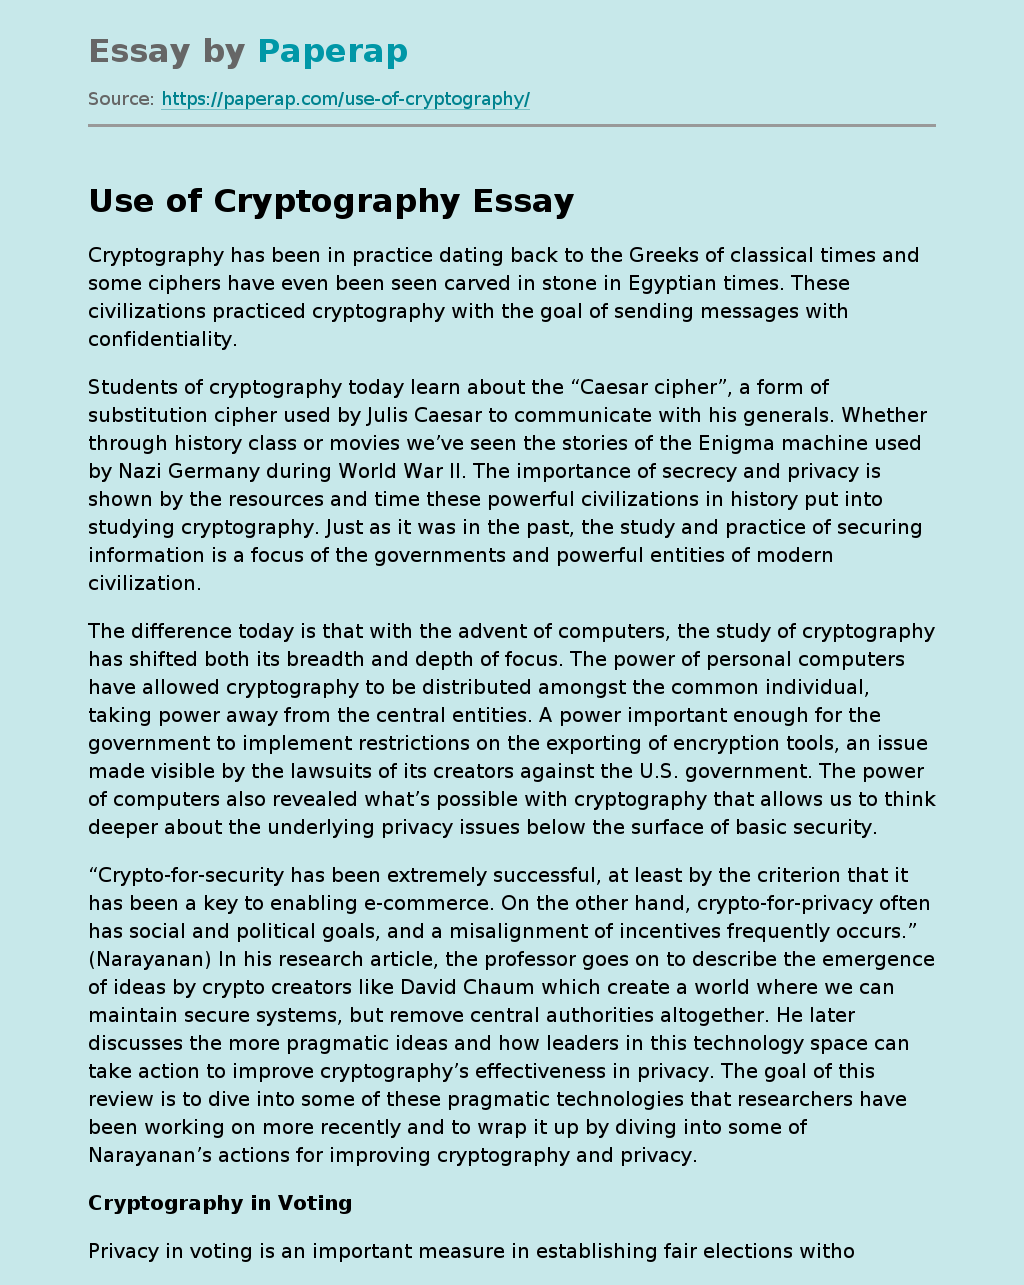 Use of Cryptography